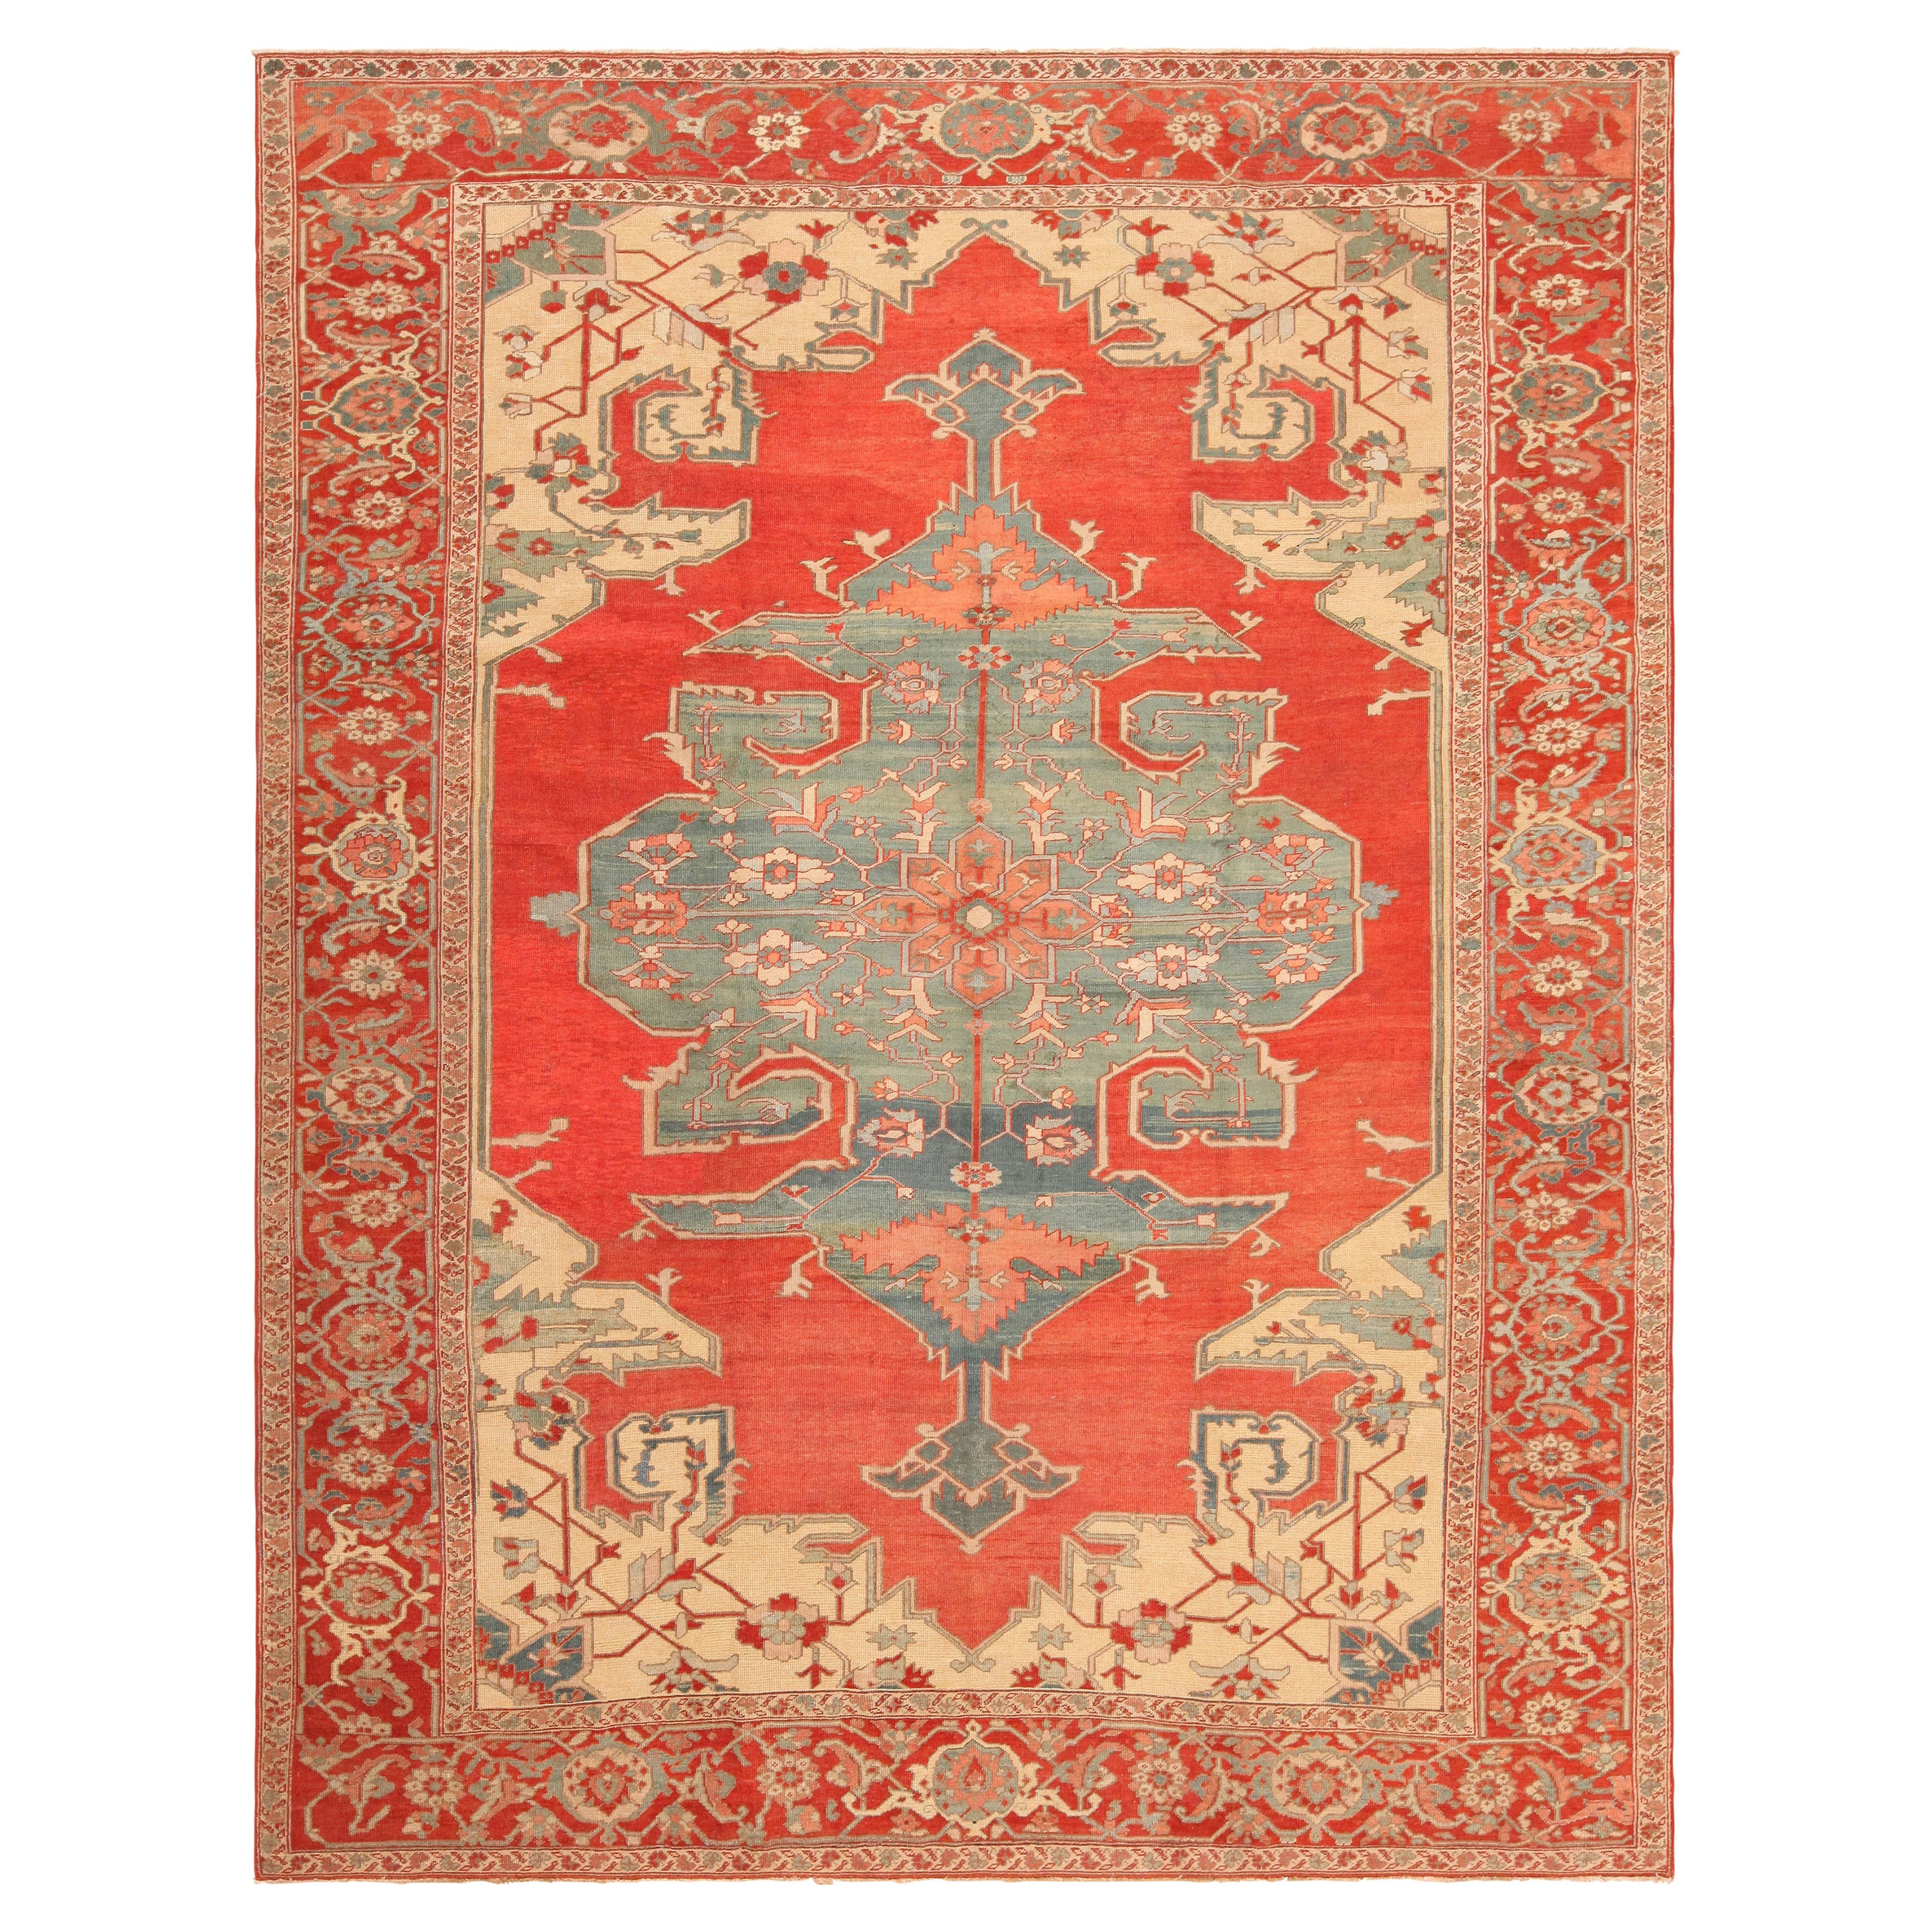 Antique Persian Serapi Rug. Size: 9 ft x 11 ft 6 in